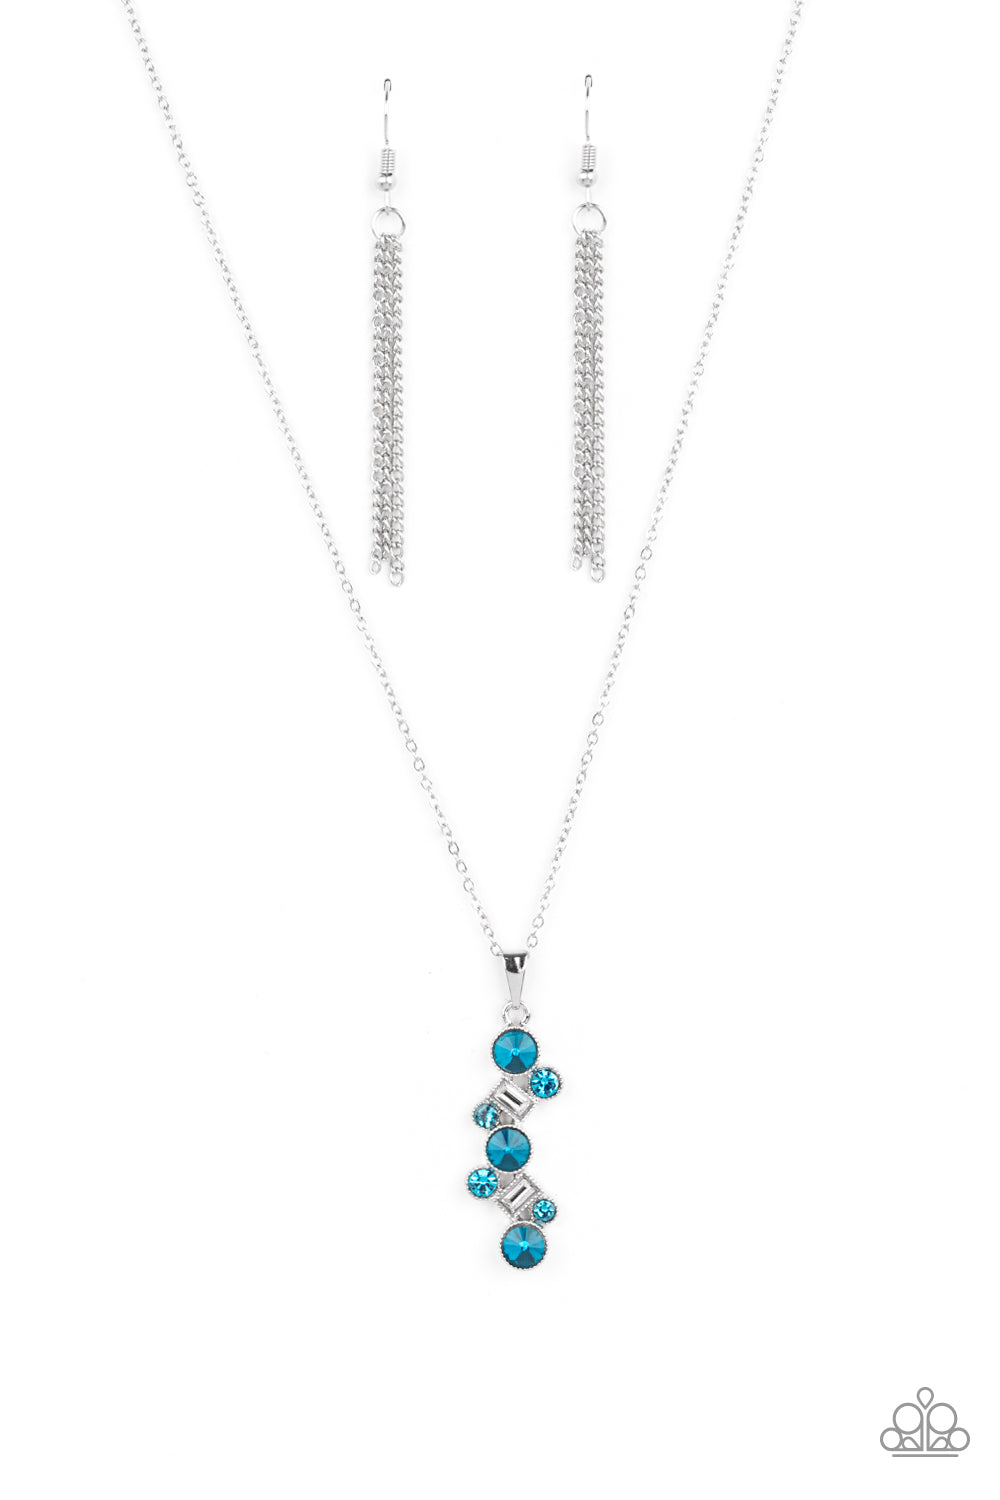 five-dollar-jewelry-classically-clustered-blue-necklace-paparazzi-accessories